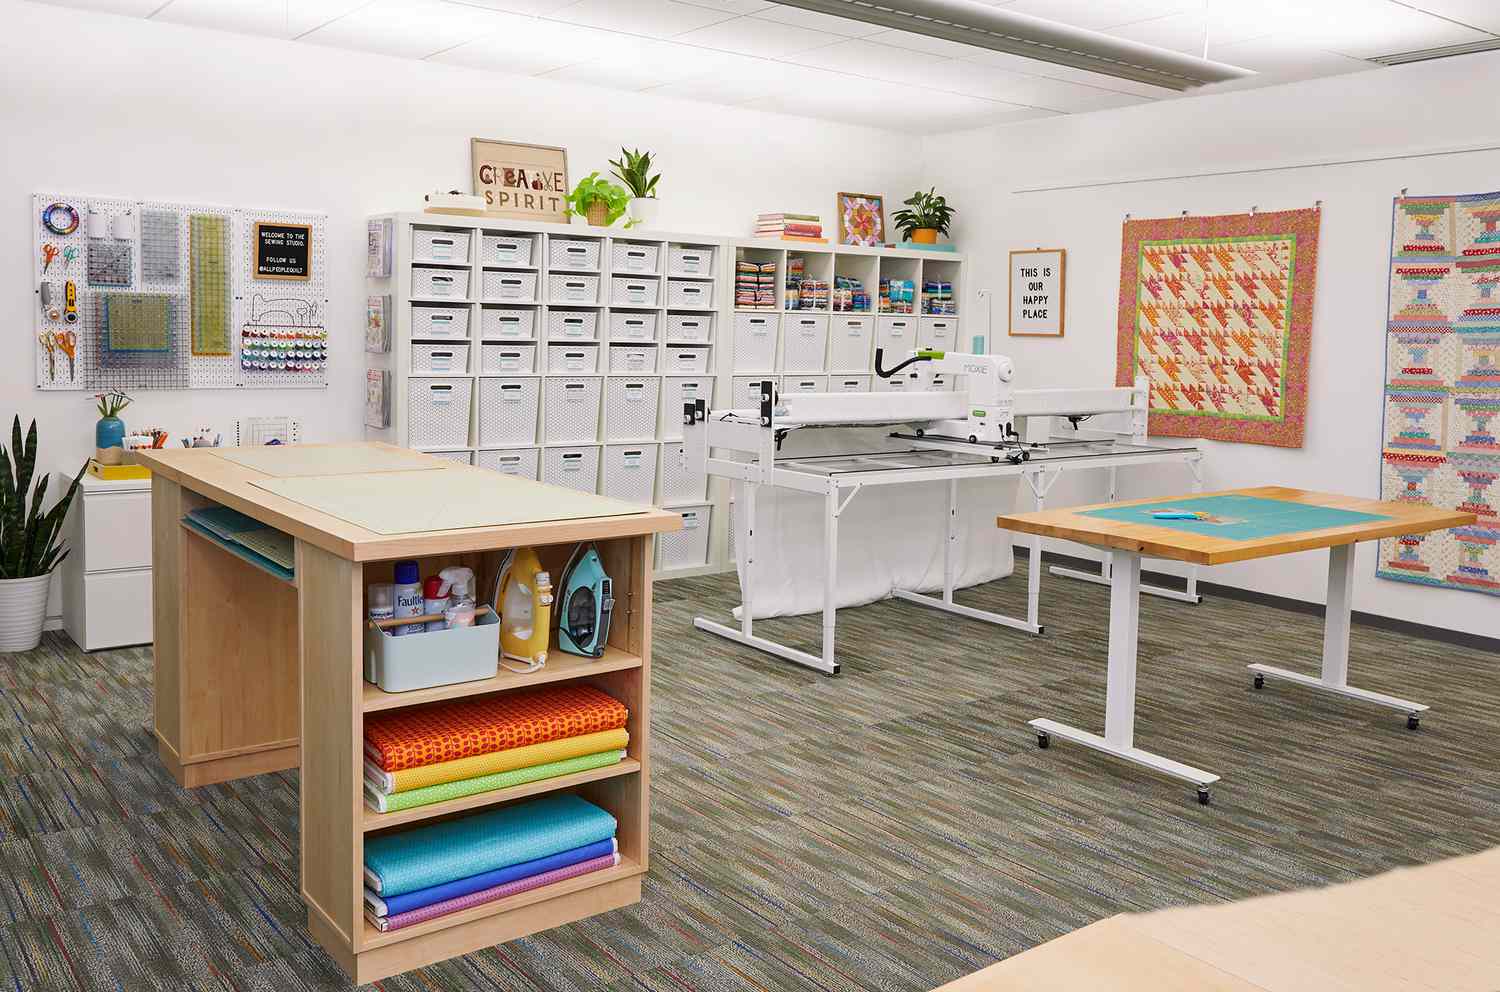 Tour the American Patchwork & Quilting Sewing Studio